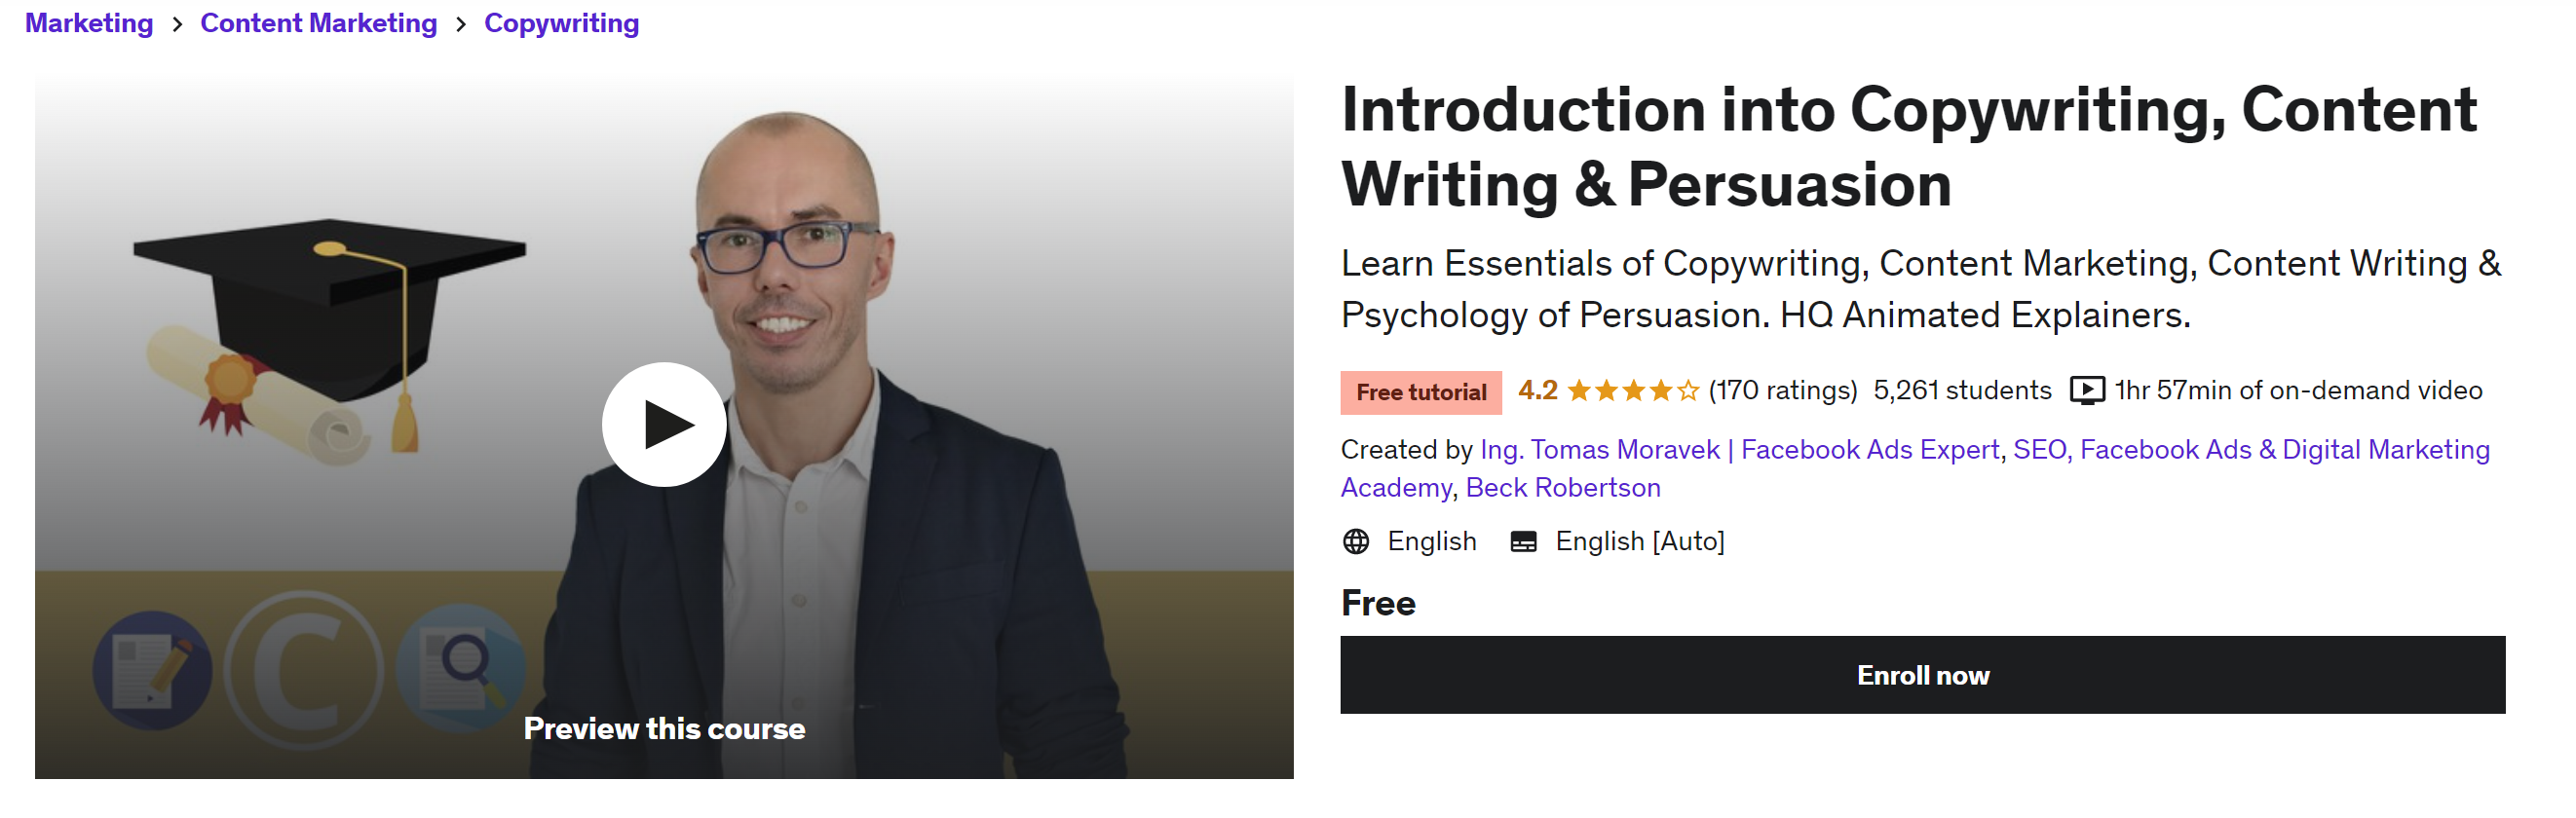 Introduction to Copywriting, Content Writing & Persuasion